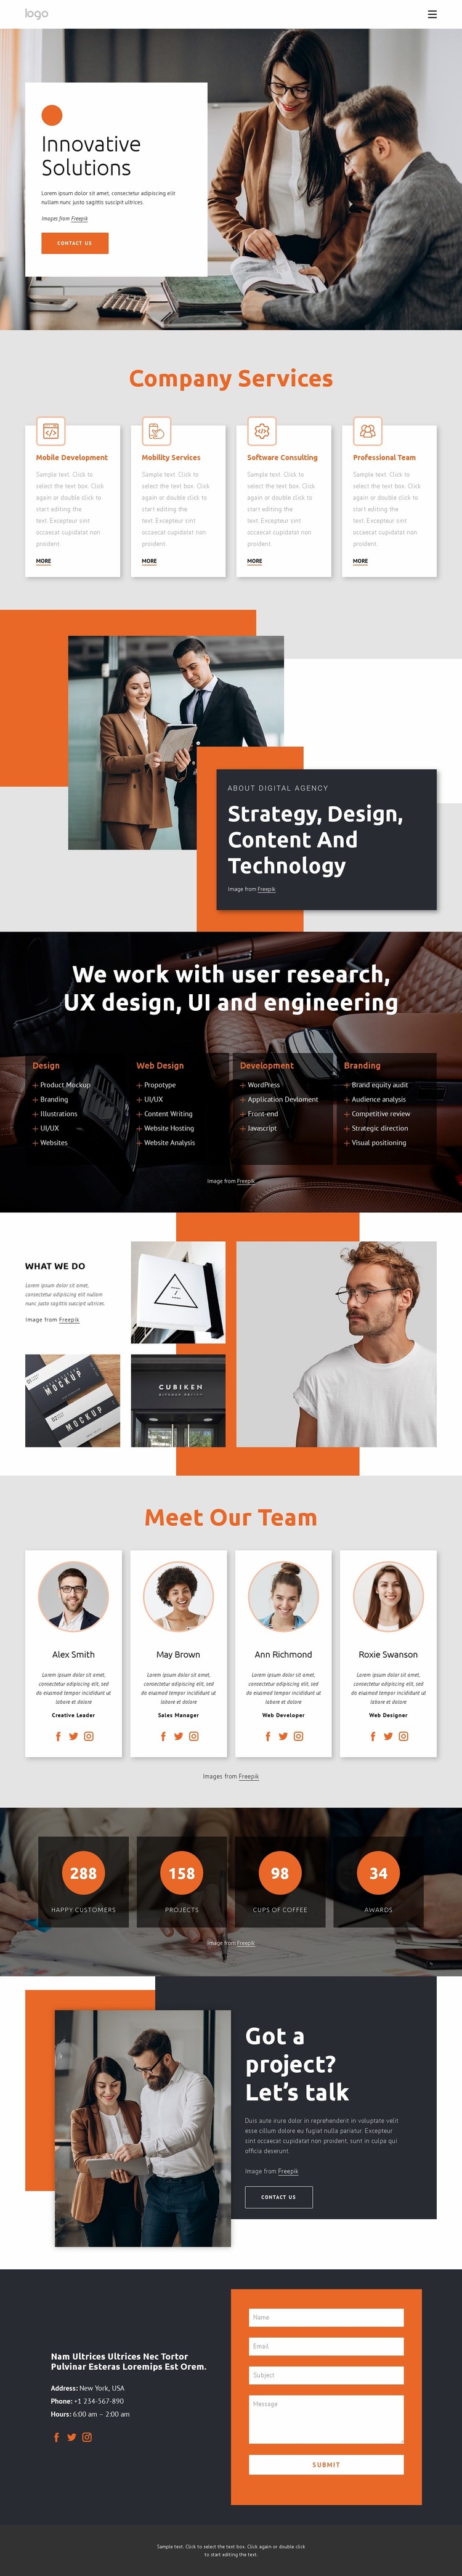 Innovative solutions and support Website Mockup